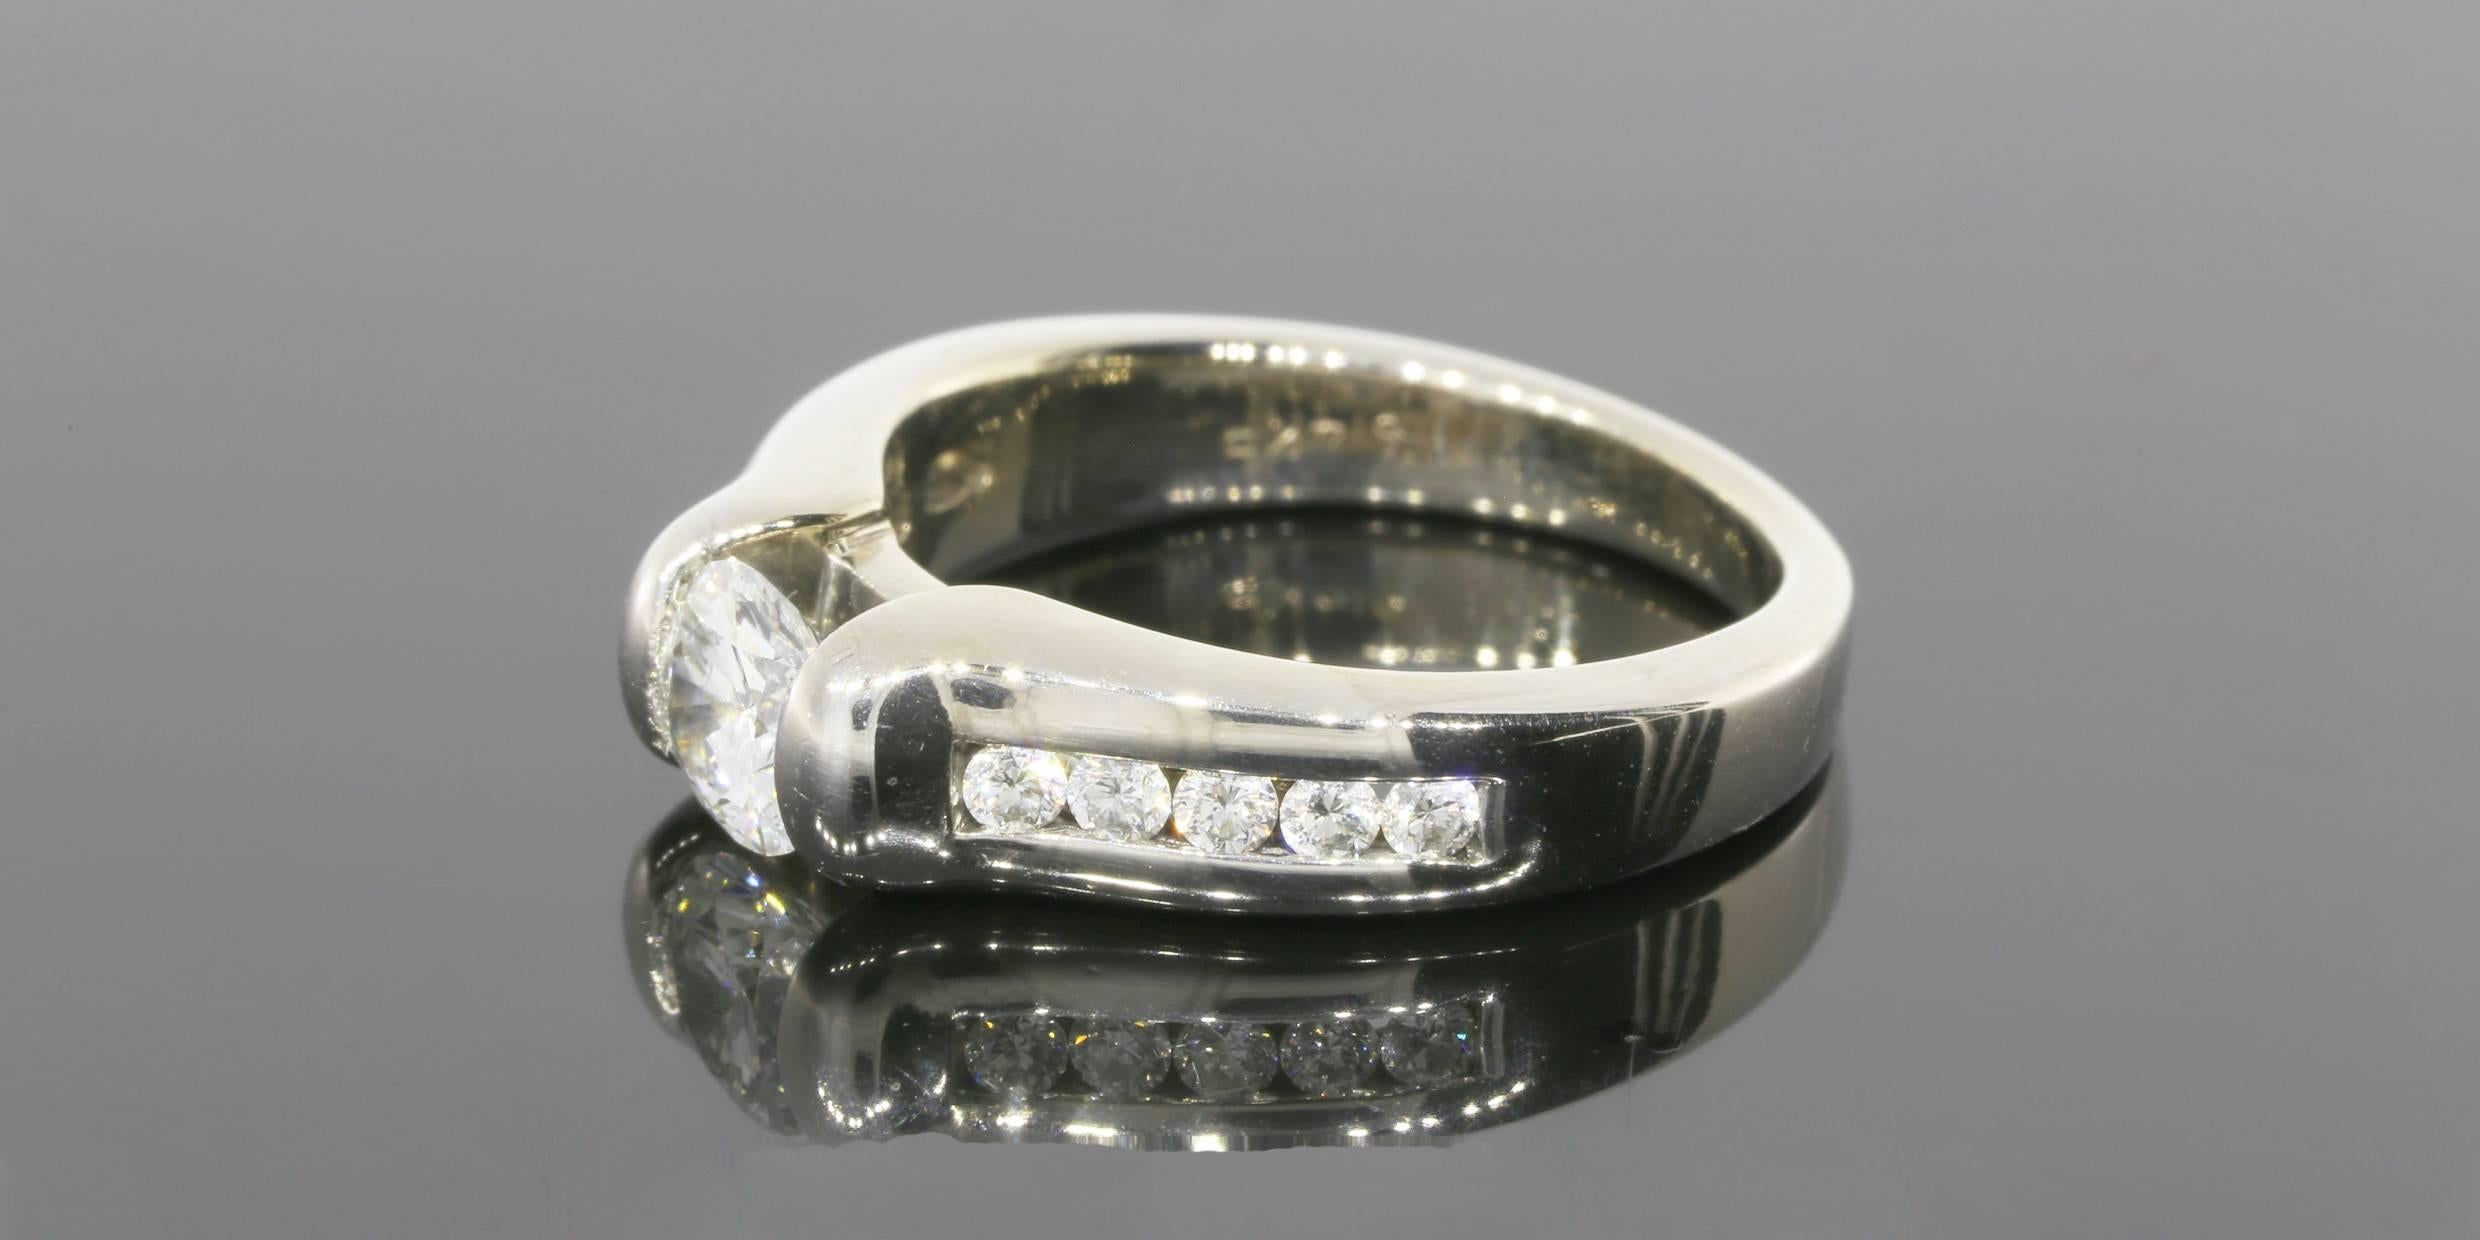 This beautiful diamond engagement ring features 1 carat total weight in sparkly round brilliant diamonds. The center diamond is a .60 carat round brilliant cut diamond that grades as H/SI1 in quality. It is tension set in a 14 karat white gold ring.